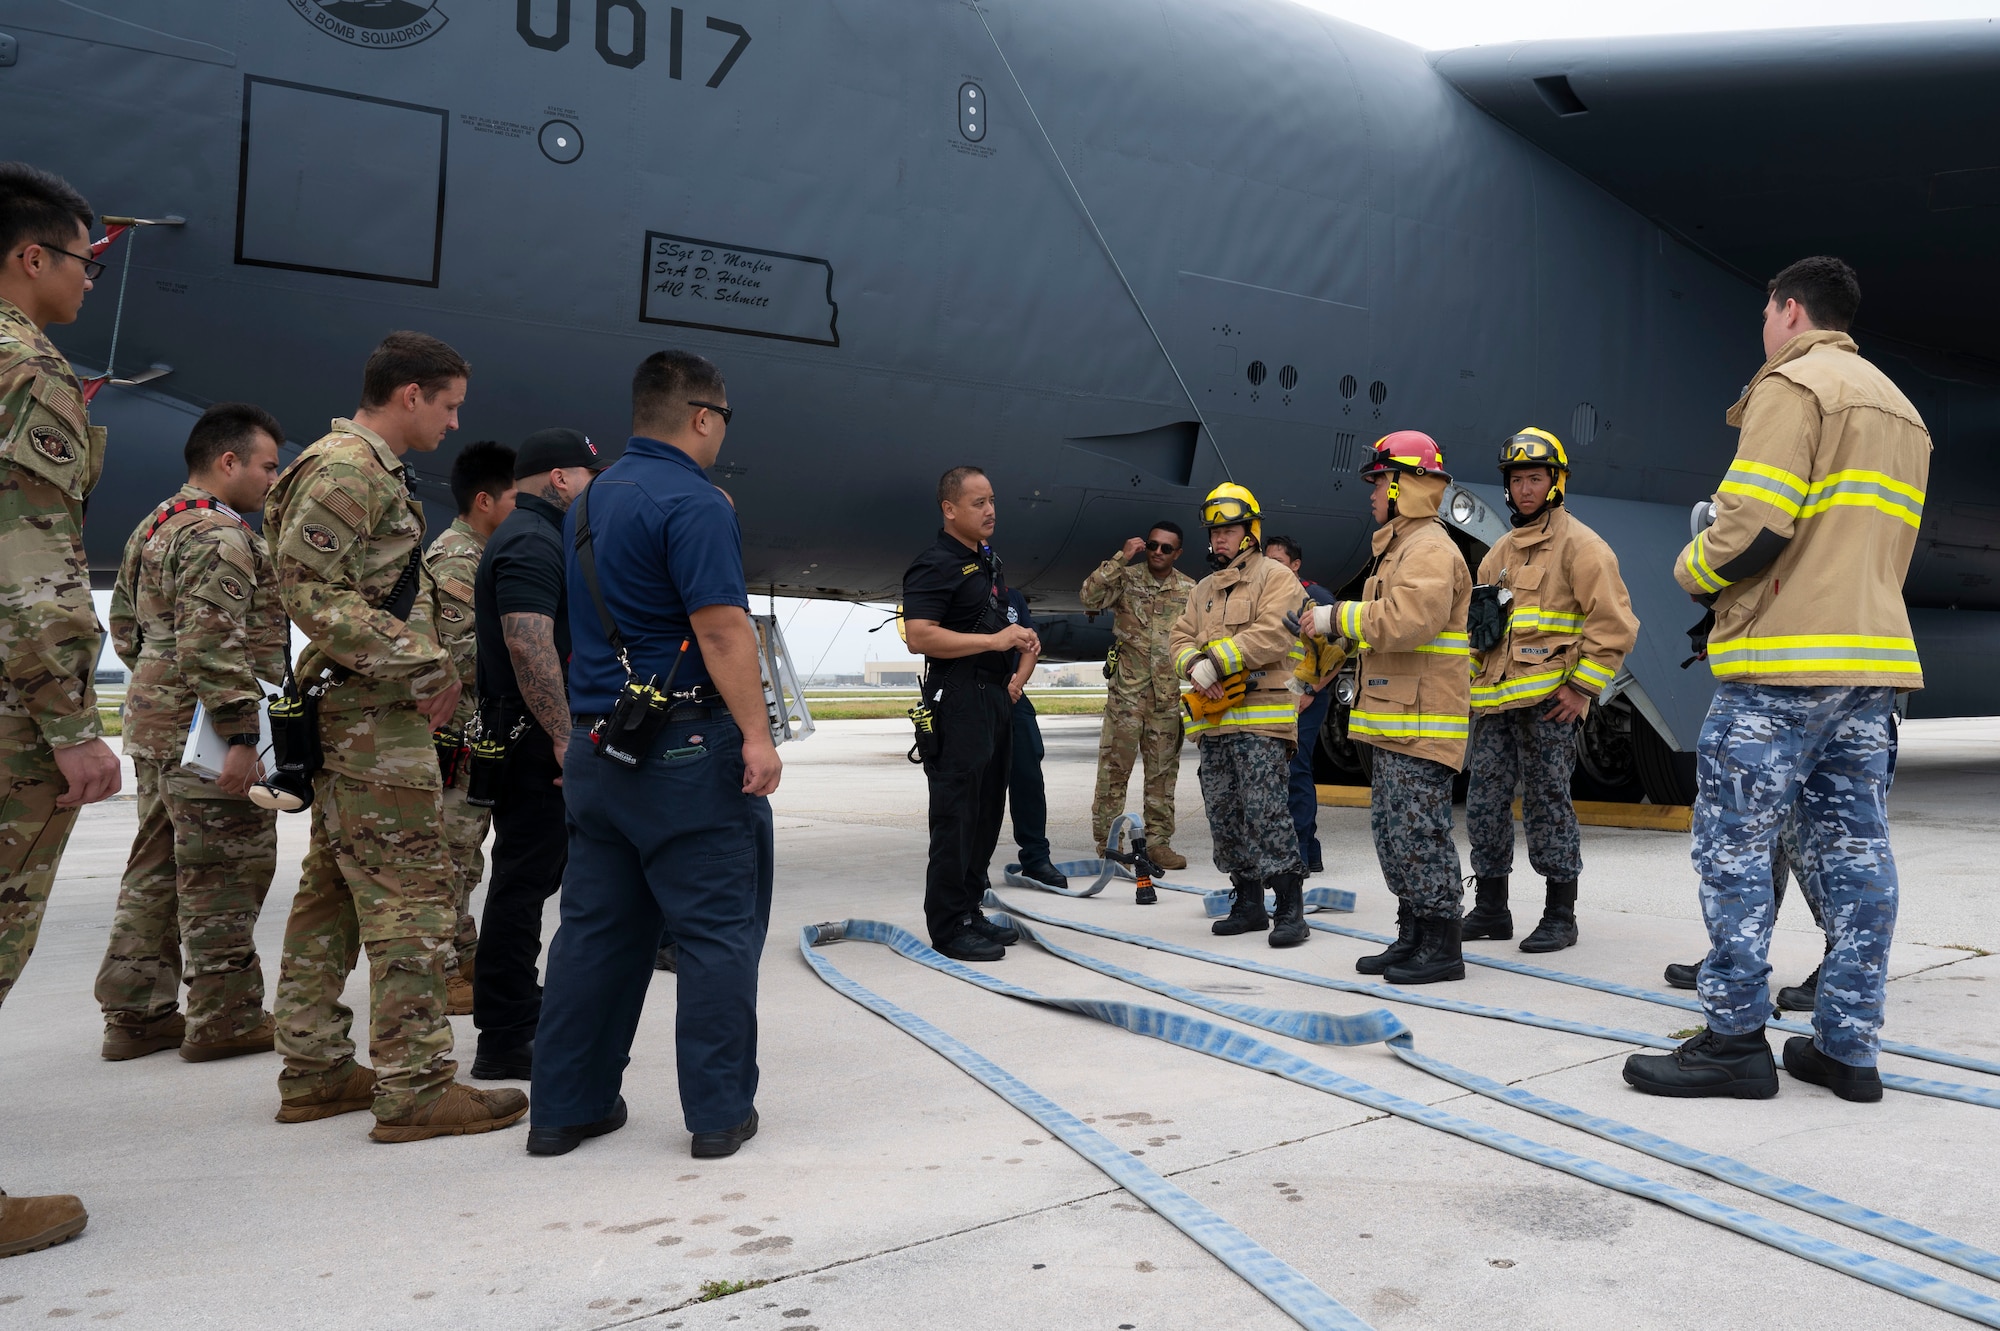 Crispin Pacificar, 36th Civil Engineer Squadron assistant fire chief, briefs members of the U.S. Air Force, Japan Air Self-Defense Force and Royal Australian Air Force on the emergency response procedures as part of a trilateral firefighter training during Cope North 24 on Andersen Air Force Base, Guam, Feb. 15, 2024. During the training the USAF firefighters discussed hazards, aircraft entry, engine shut-down procedures and emergency rescue procedures on a B-52 Stratofortress, all of which are vital to secure agile combat employment operations. (U.S. Air Force photo by Airman 1st Class Spencer Perkins)